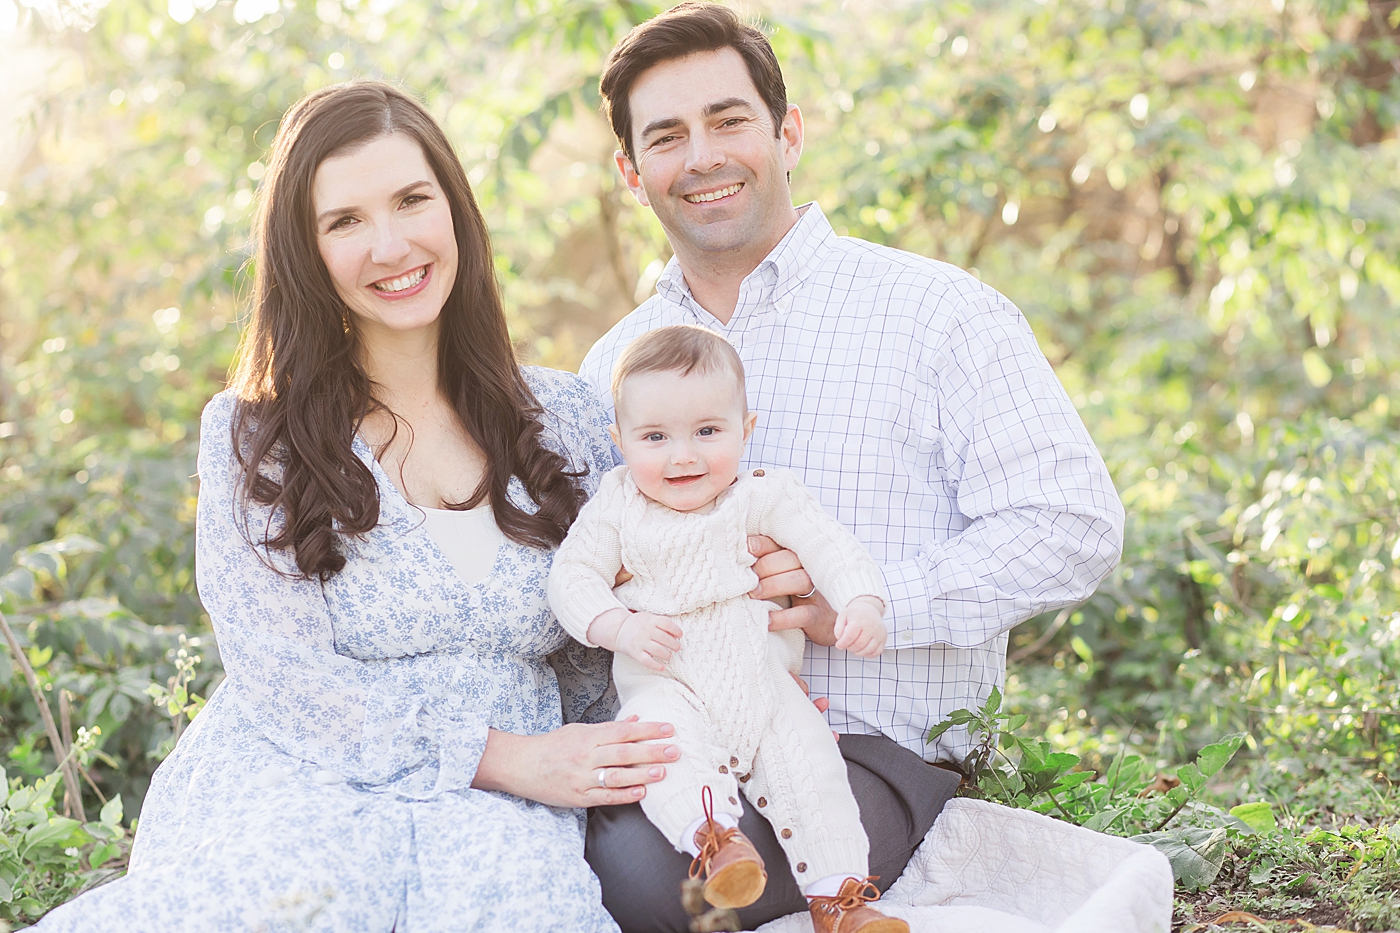 Family portraits in Houston TX with Fresh Light Photography.